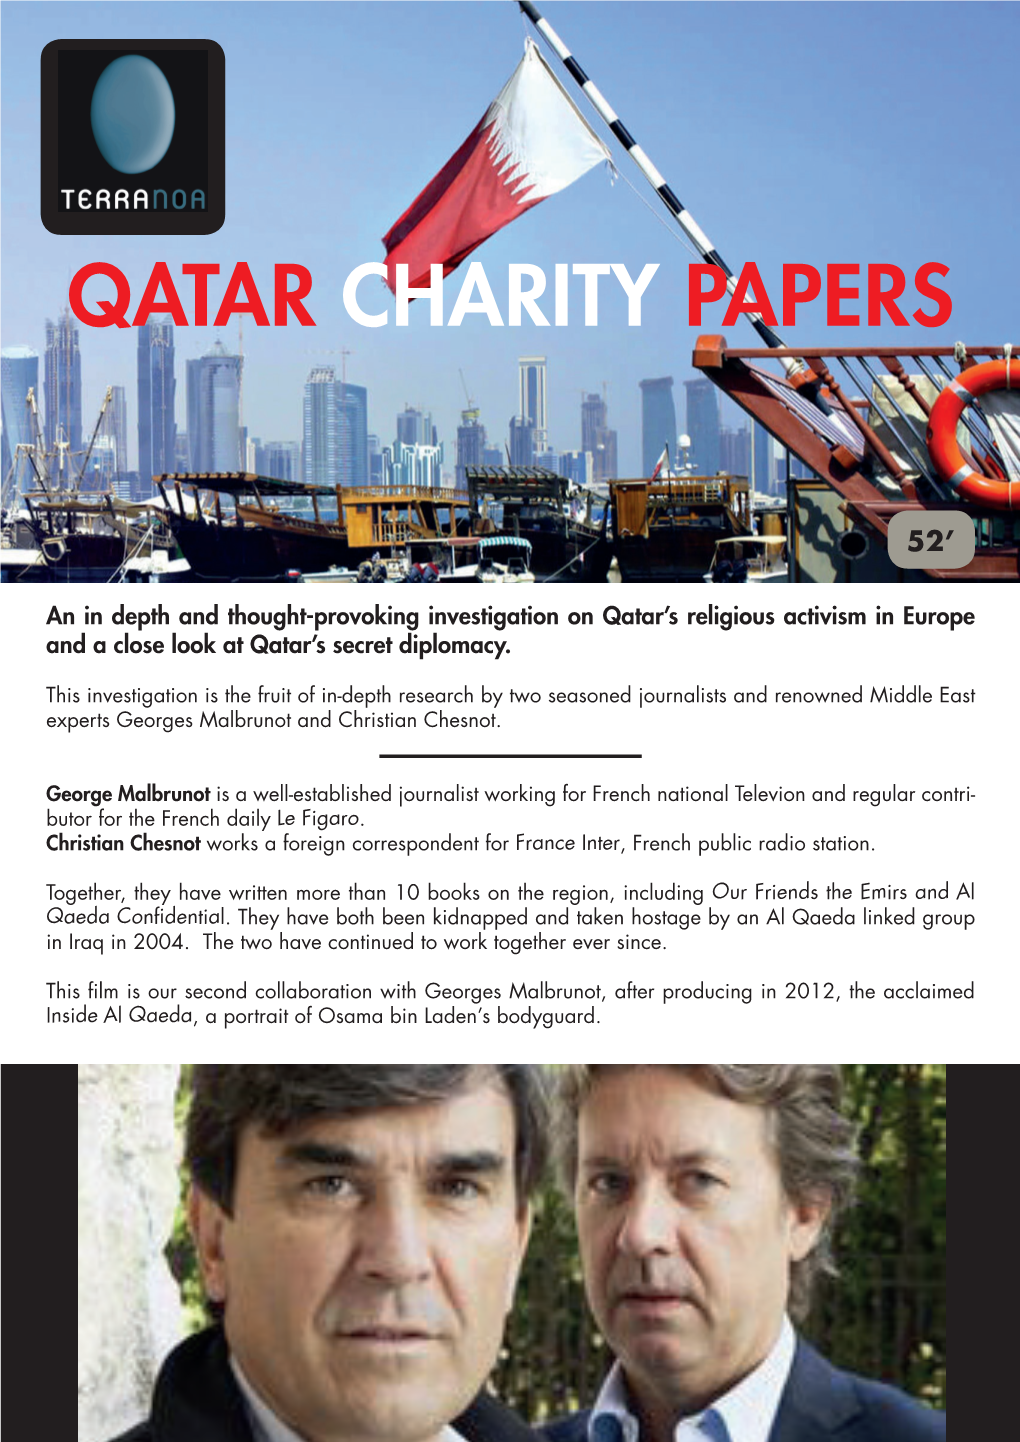 Qatar Charity Papers